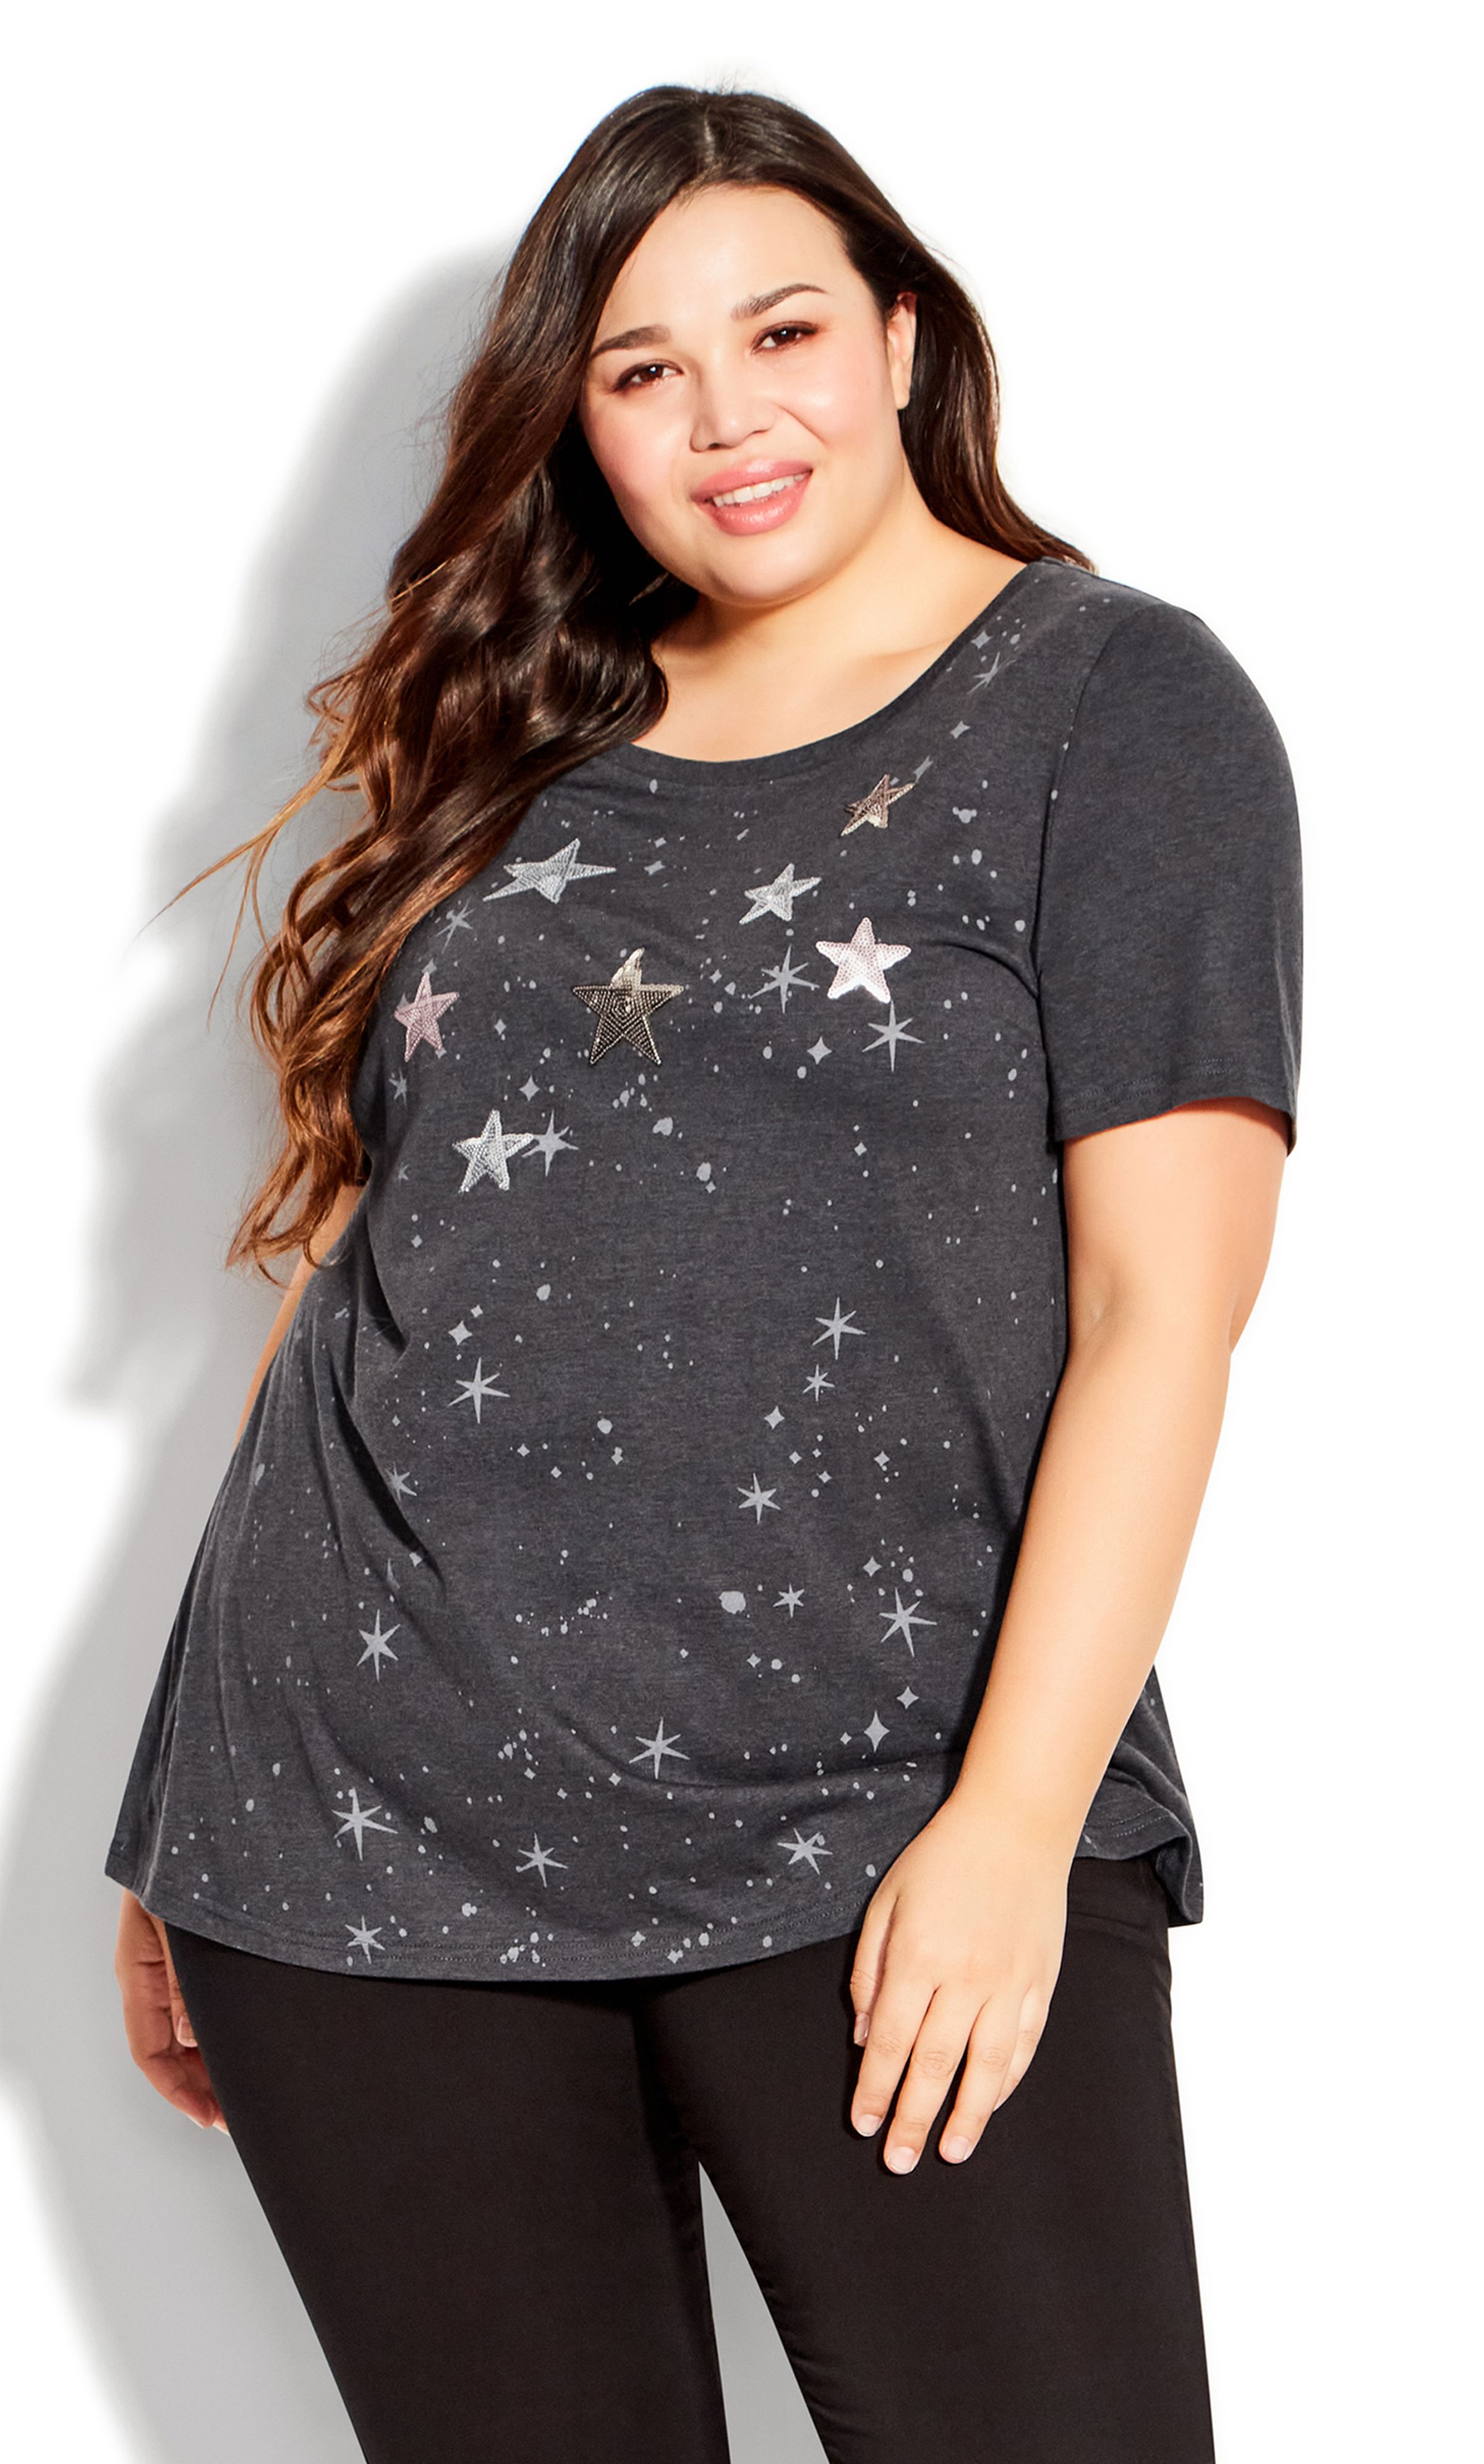 Show star potential in this classic charcoal tee! The Star Top features sequin embellishment to liven up this simple shape, perfect for any occasion in a comfortable Cotton fabrication. Key Features Include: - Round neckline - Short sleeves - Pull-over fit - Relaxed tee silhouette - Sequin embellished star graphic - Easy wear, easy-care Cotton fabrication - Straight hemline at hips Switch out a basic black tee for this printed pick with skinny jeans and some slouchy boots.